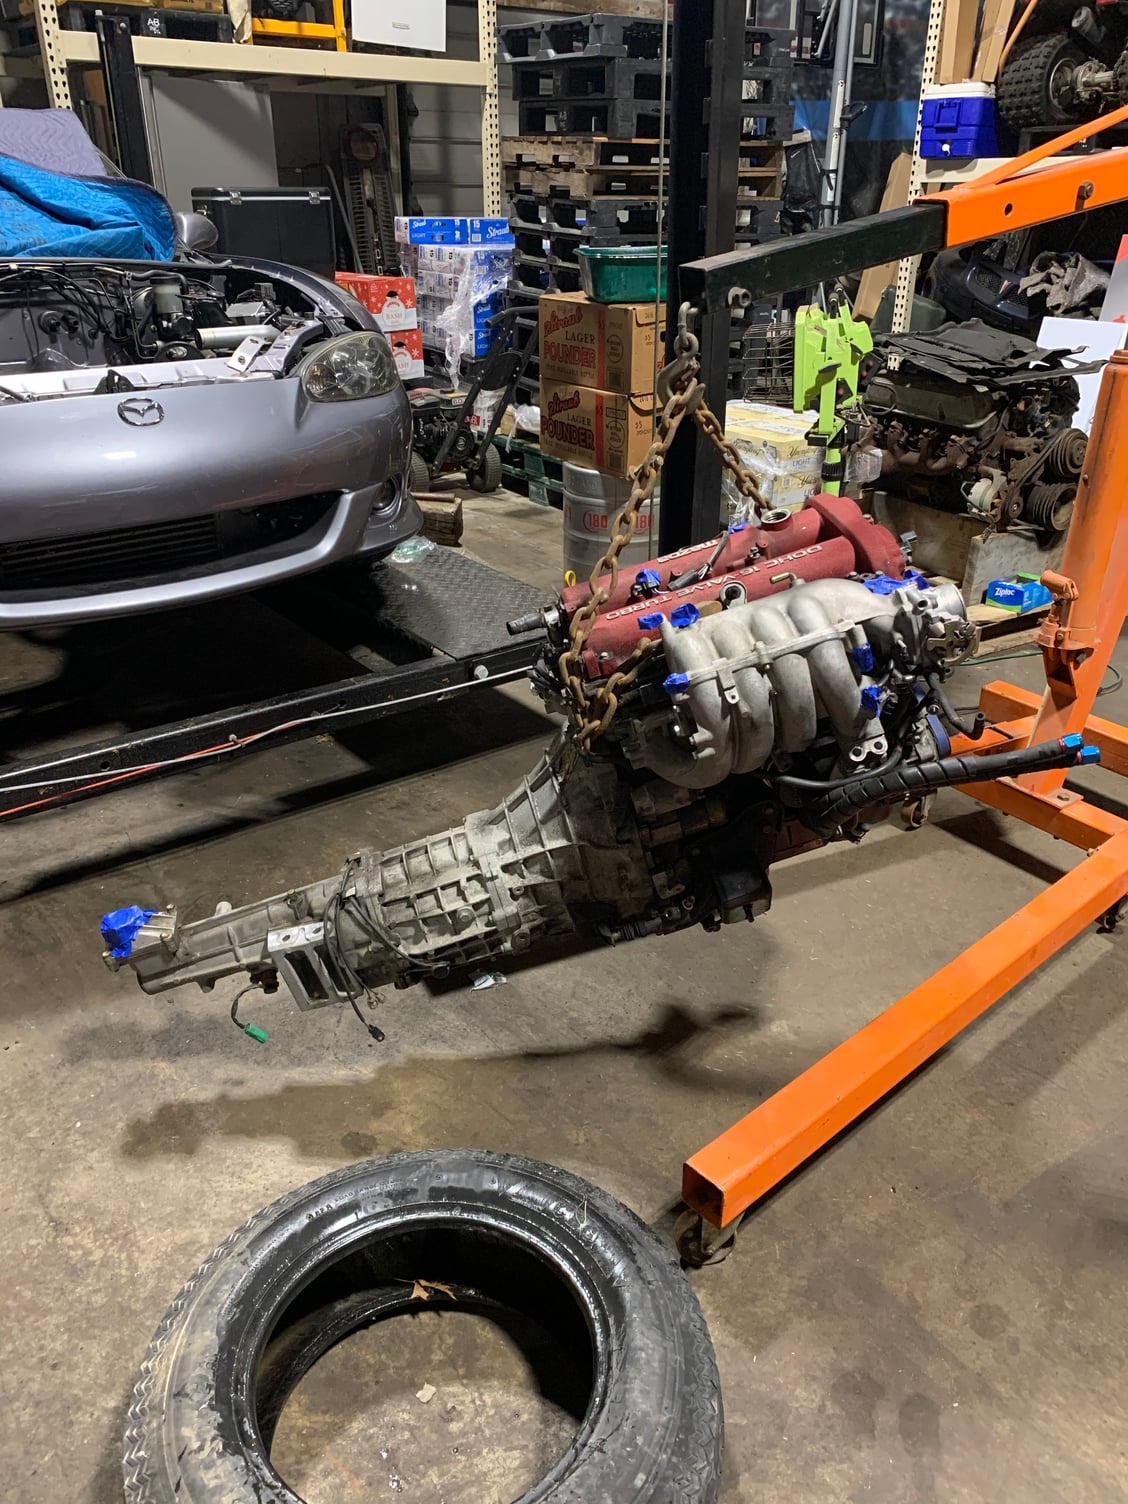 Advice needed for first engine build - Miata Turbo Forum - Boost